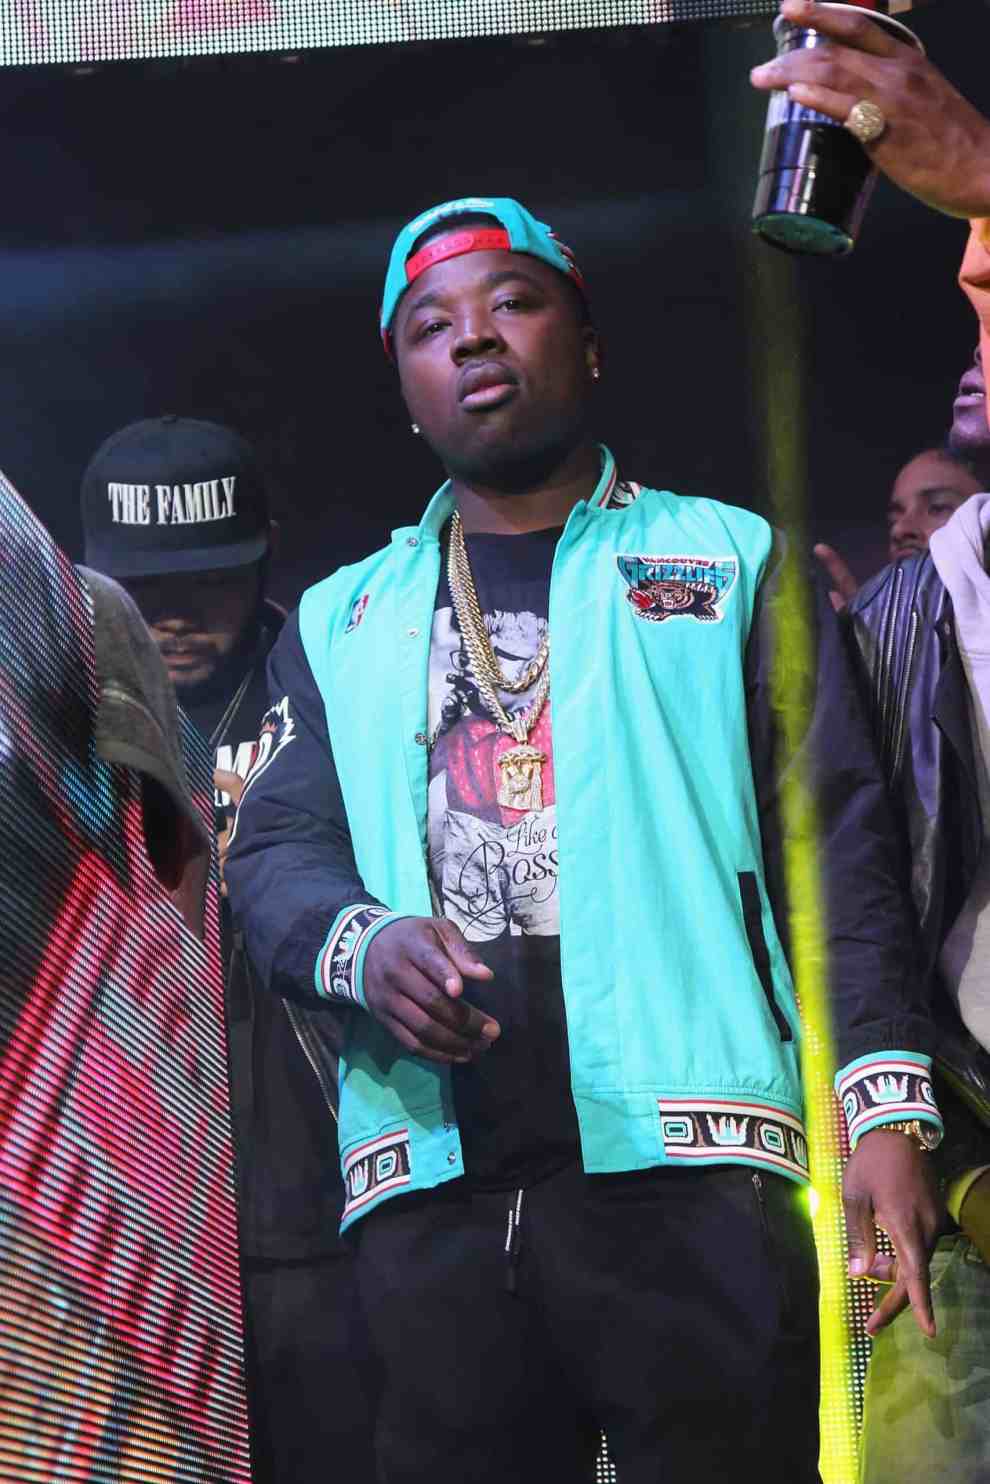 Troy Ave in Vancouver Grizzlies jacket walking through crowd